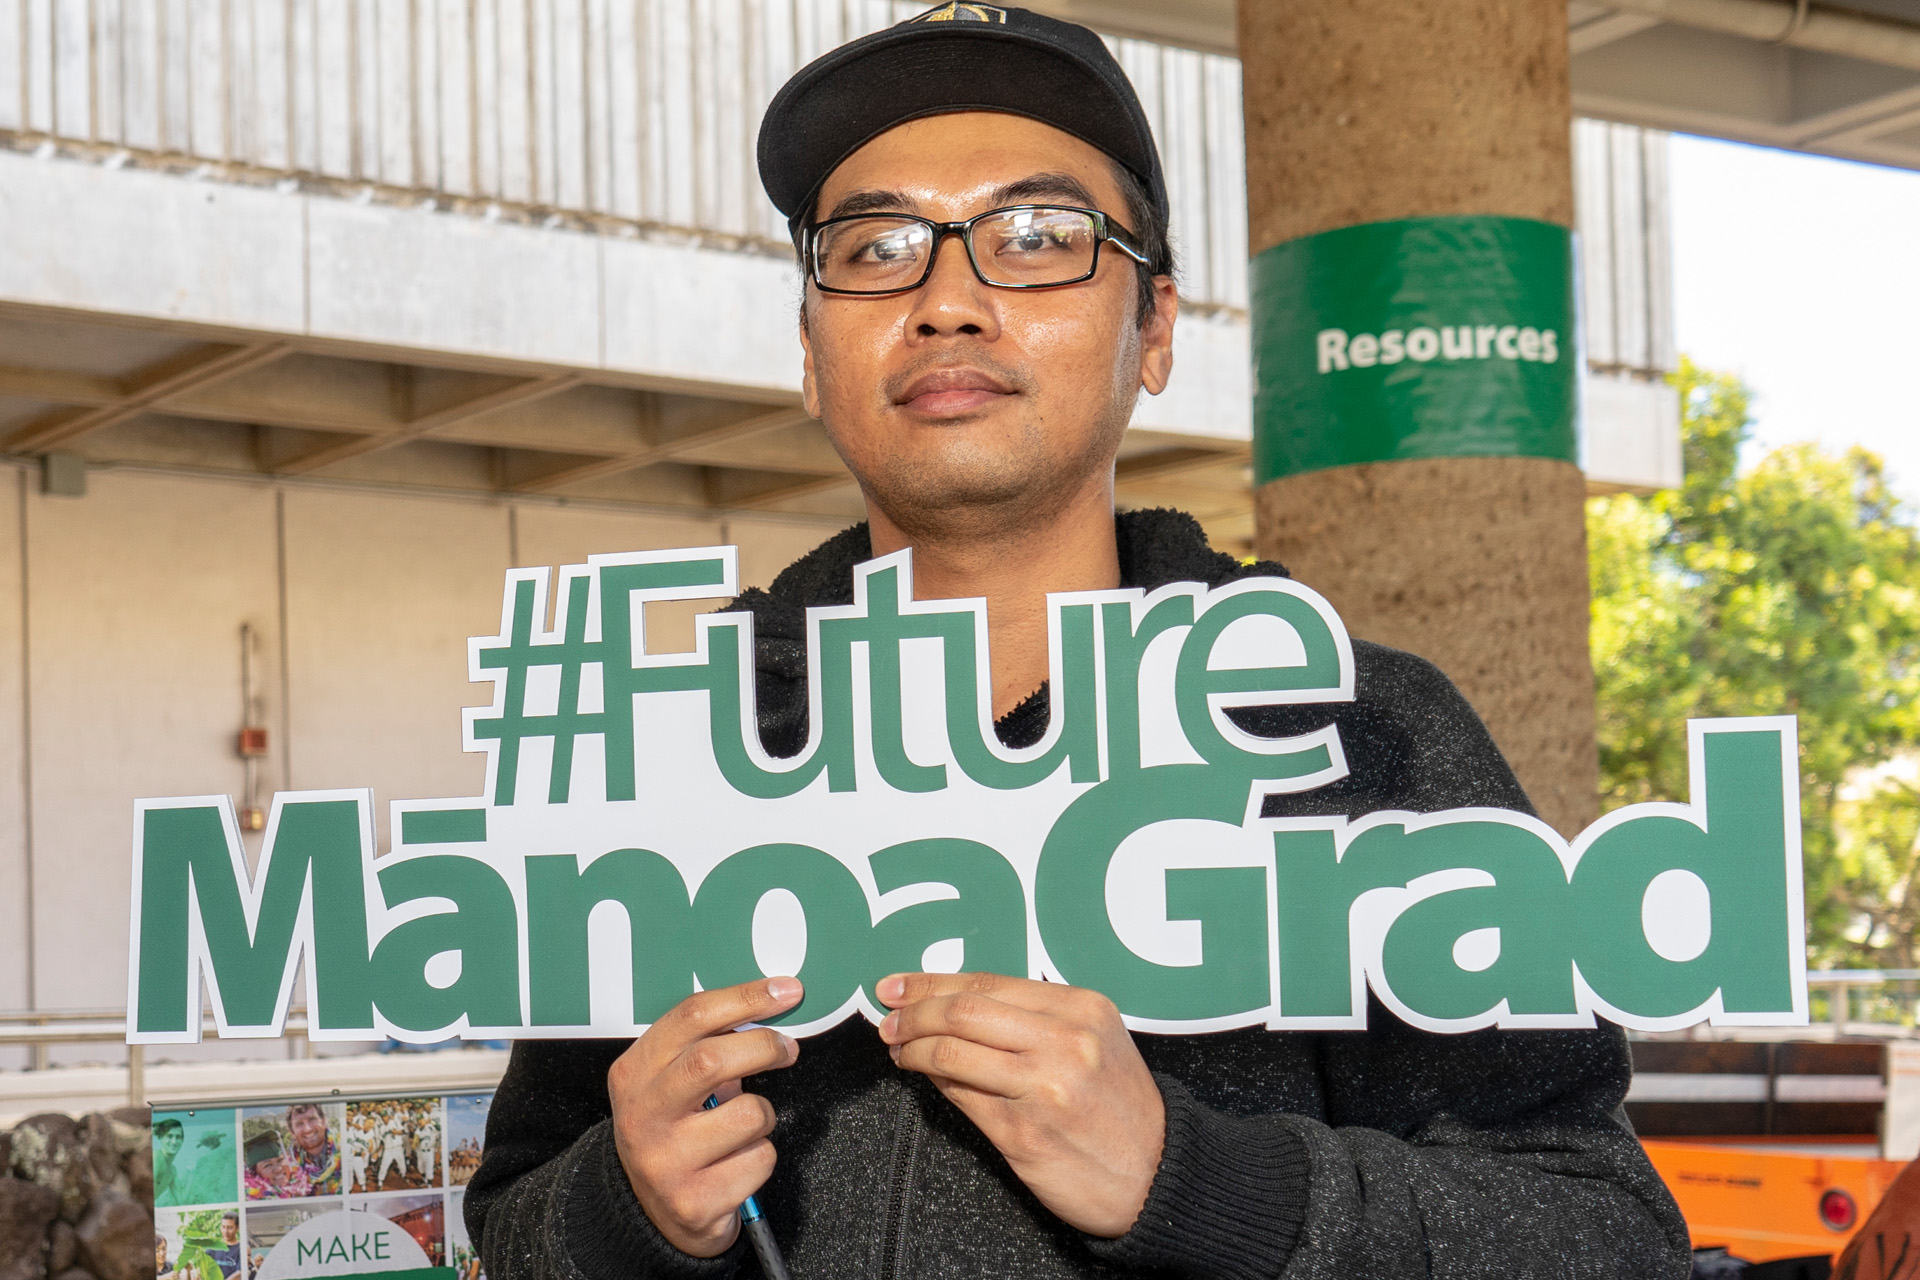 male student holding sign with "#futuremanoagrad"